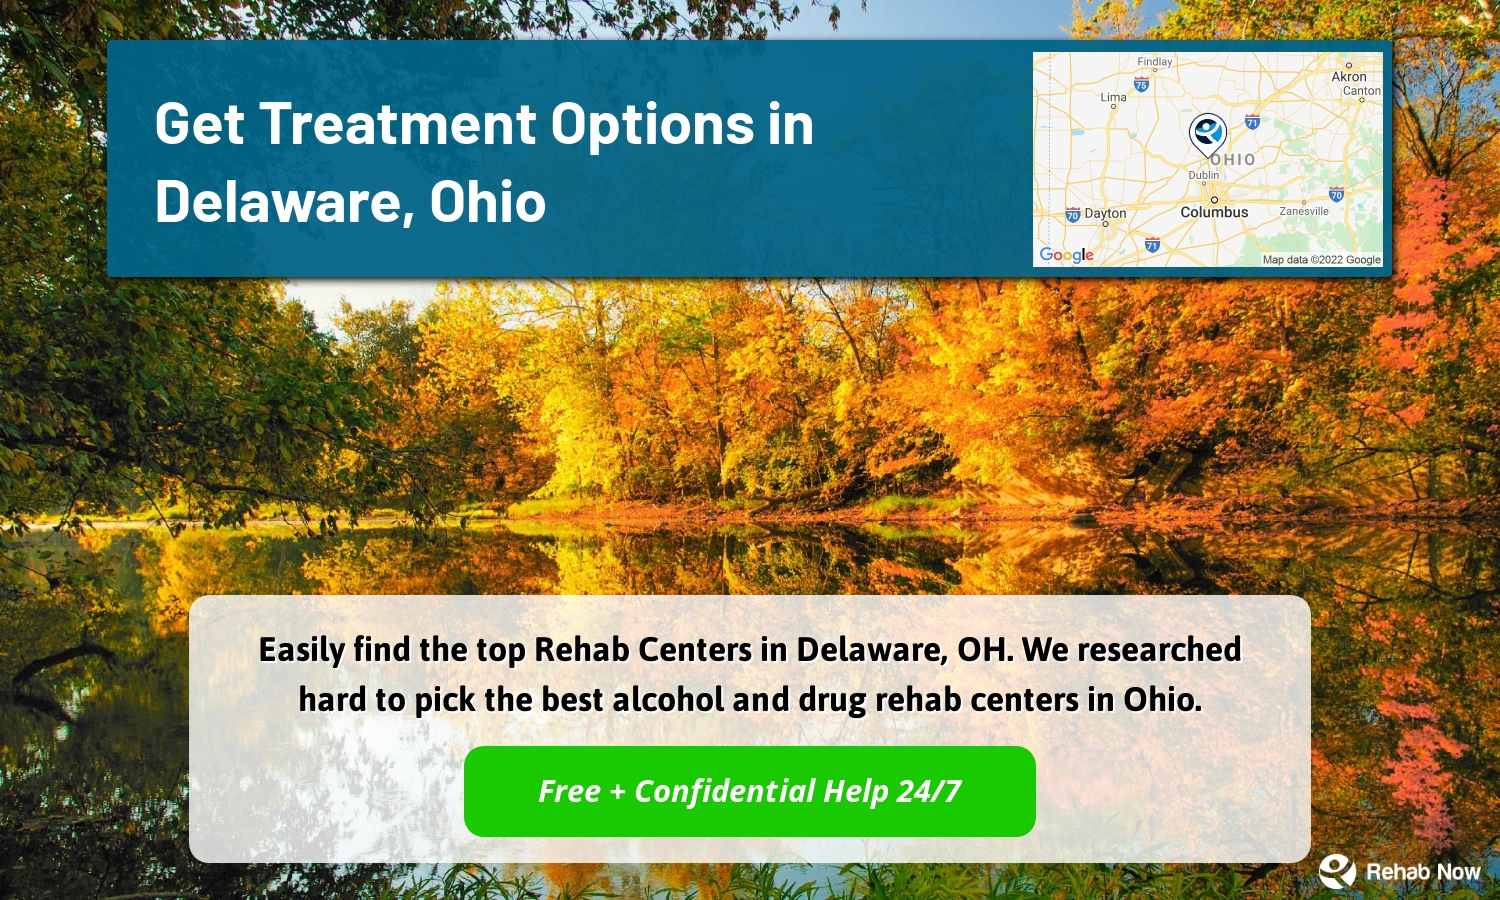 Easily find the top Rehab Centers in Delaware, OH. We researched hard to pick the best alcohol and drug rehab centers in Ohio.